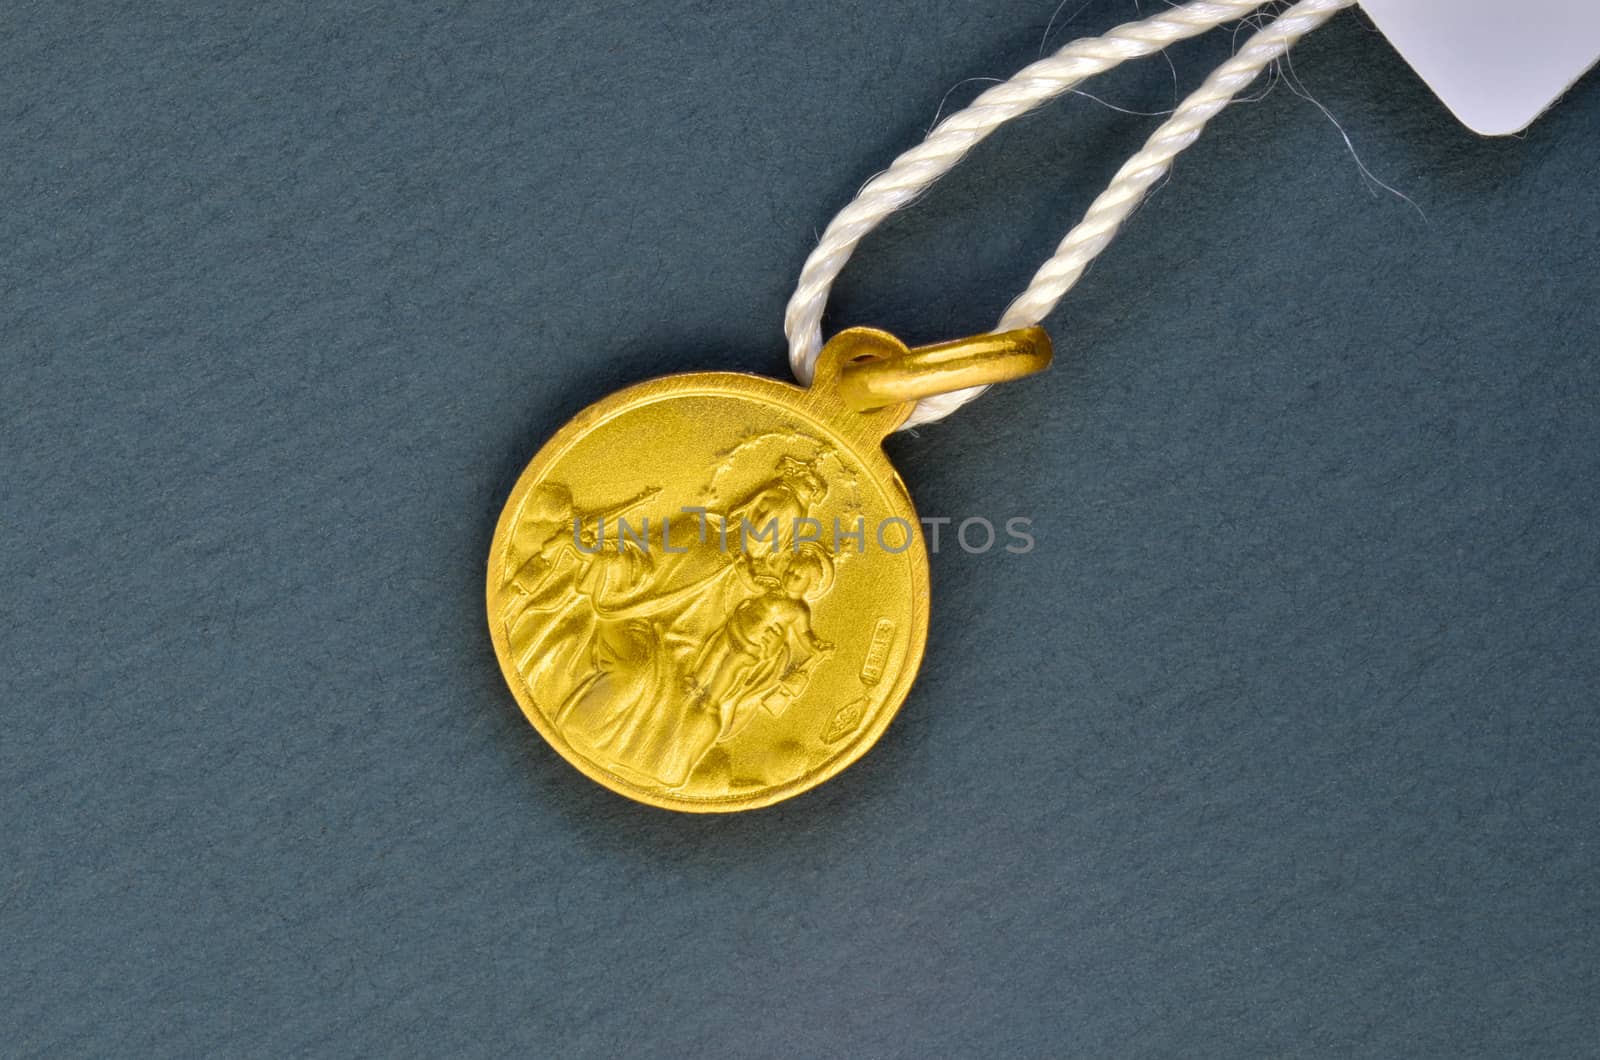 Golden scapular pendant traditionally given for first communion gift. Macro image.